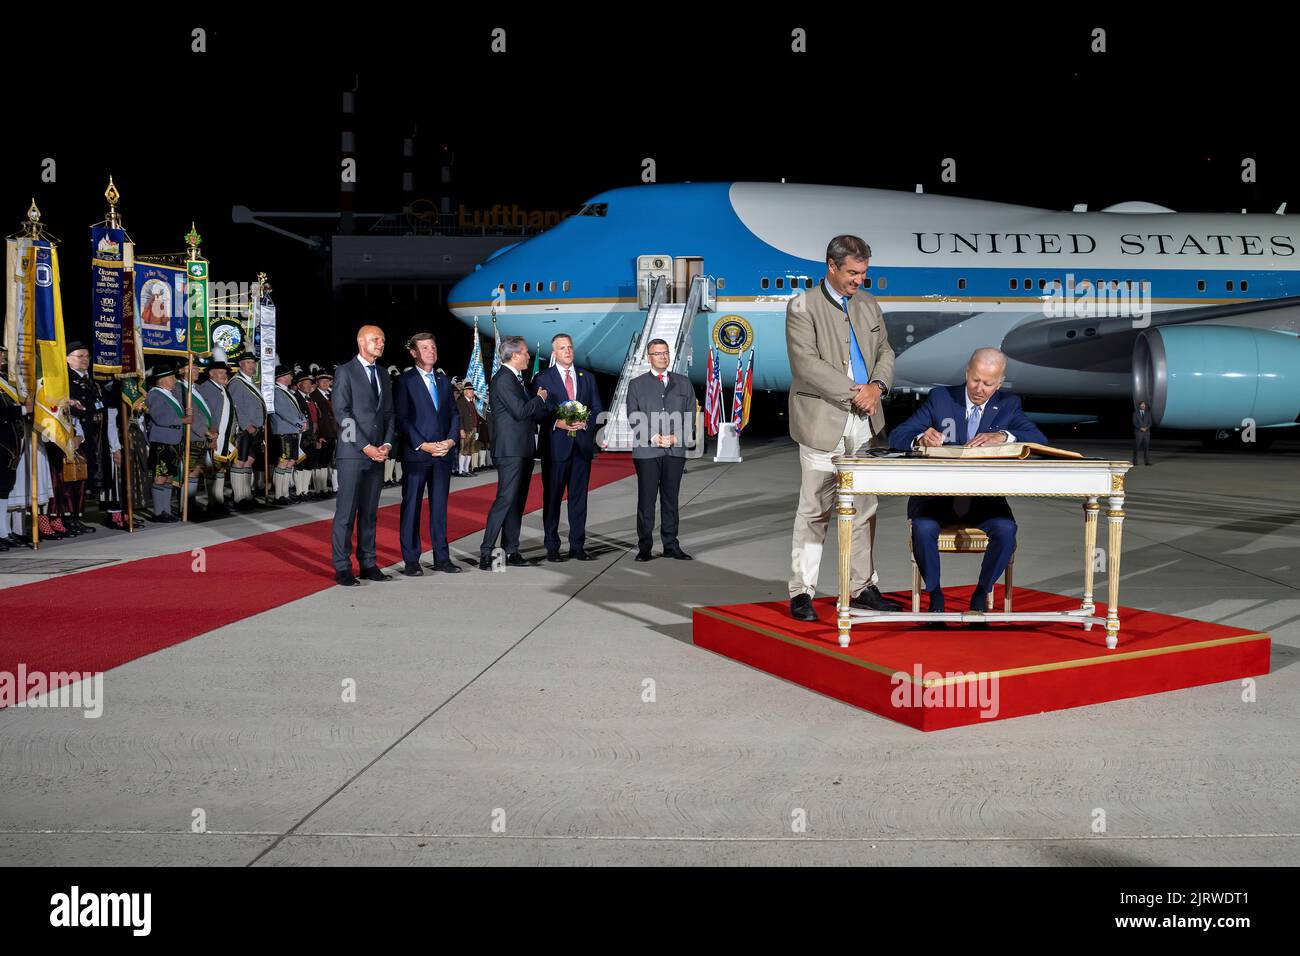 President Joe Biden signs the Golden Book of the Land of Bavaria after arriving at Munich International Airport to attend the G7 Summit in Schloss Elmau, Germany, Saturday, June 25, 2022. (Official White House Photo by Adam Schultz) Stock Photo